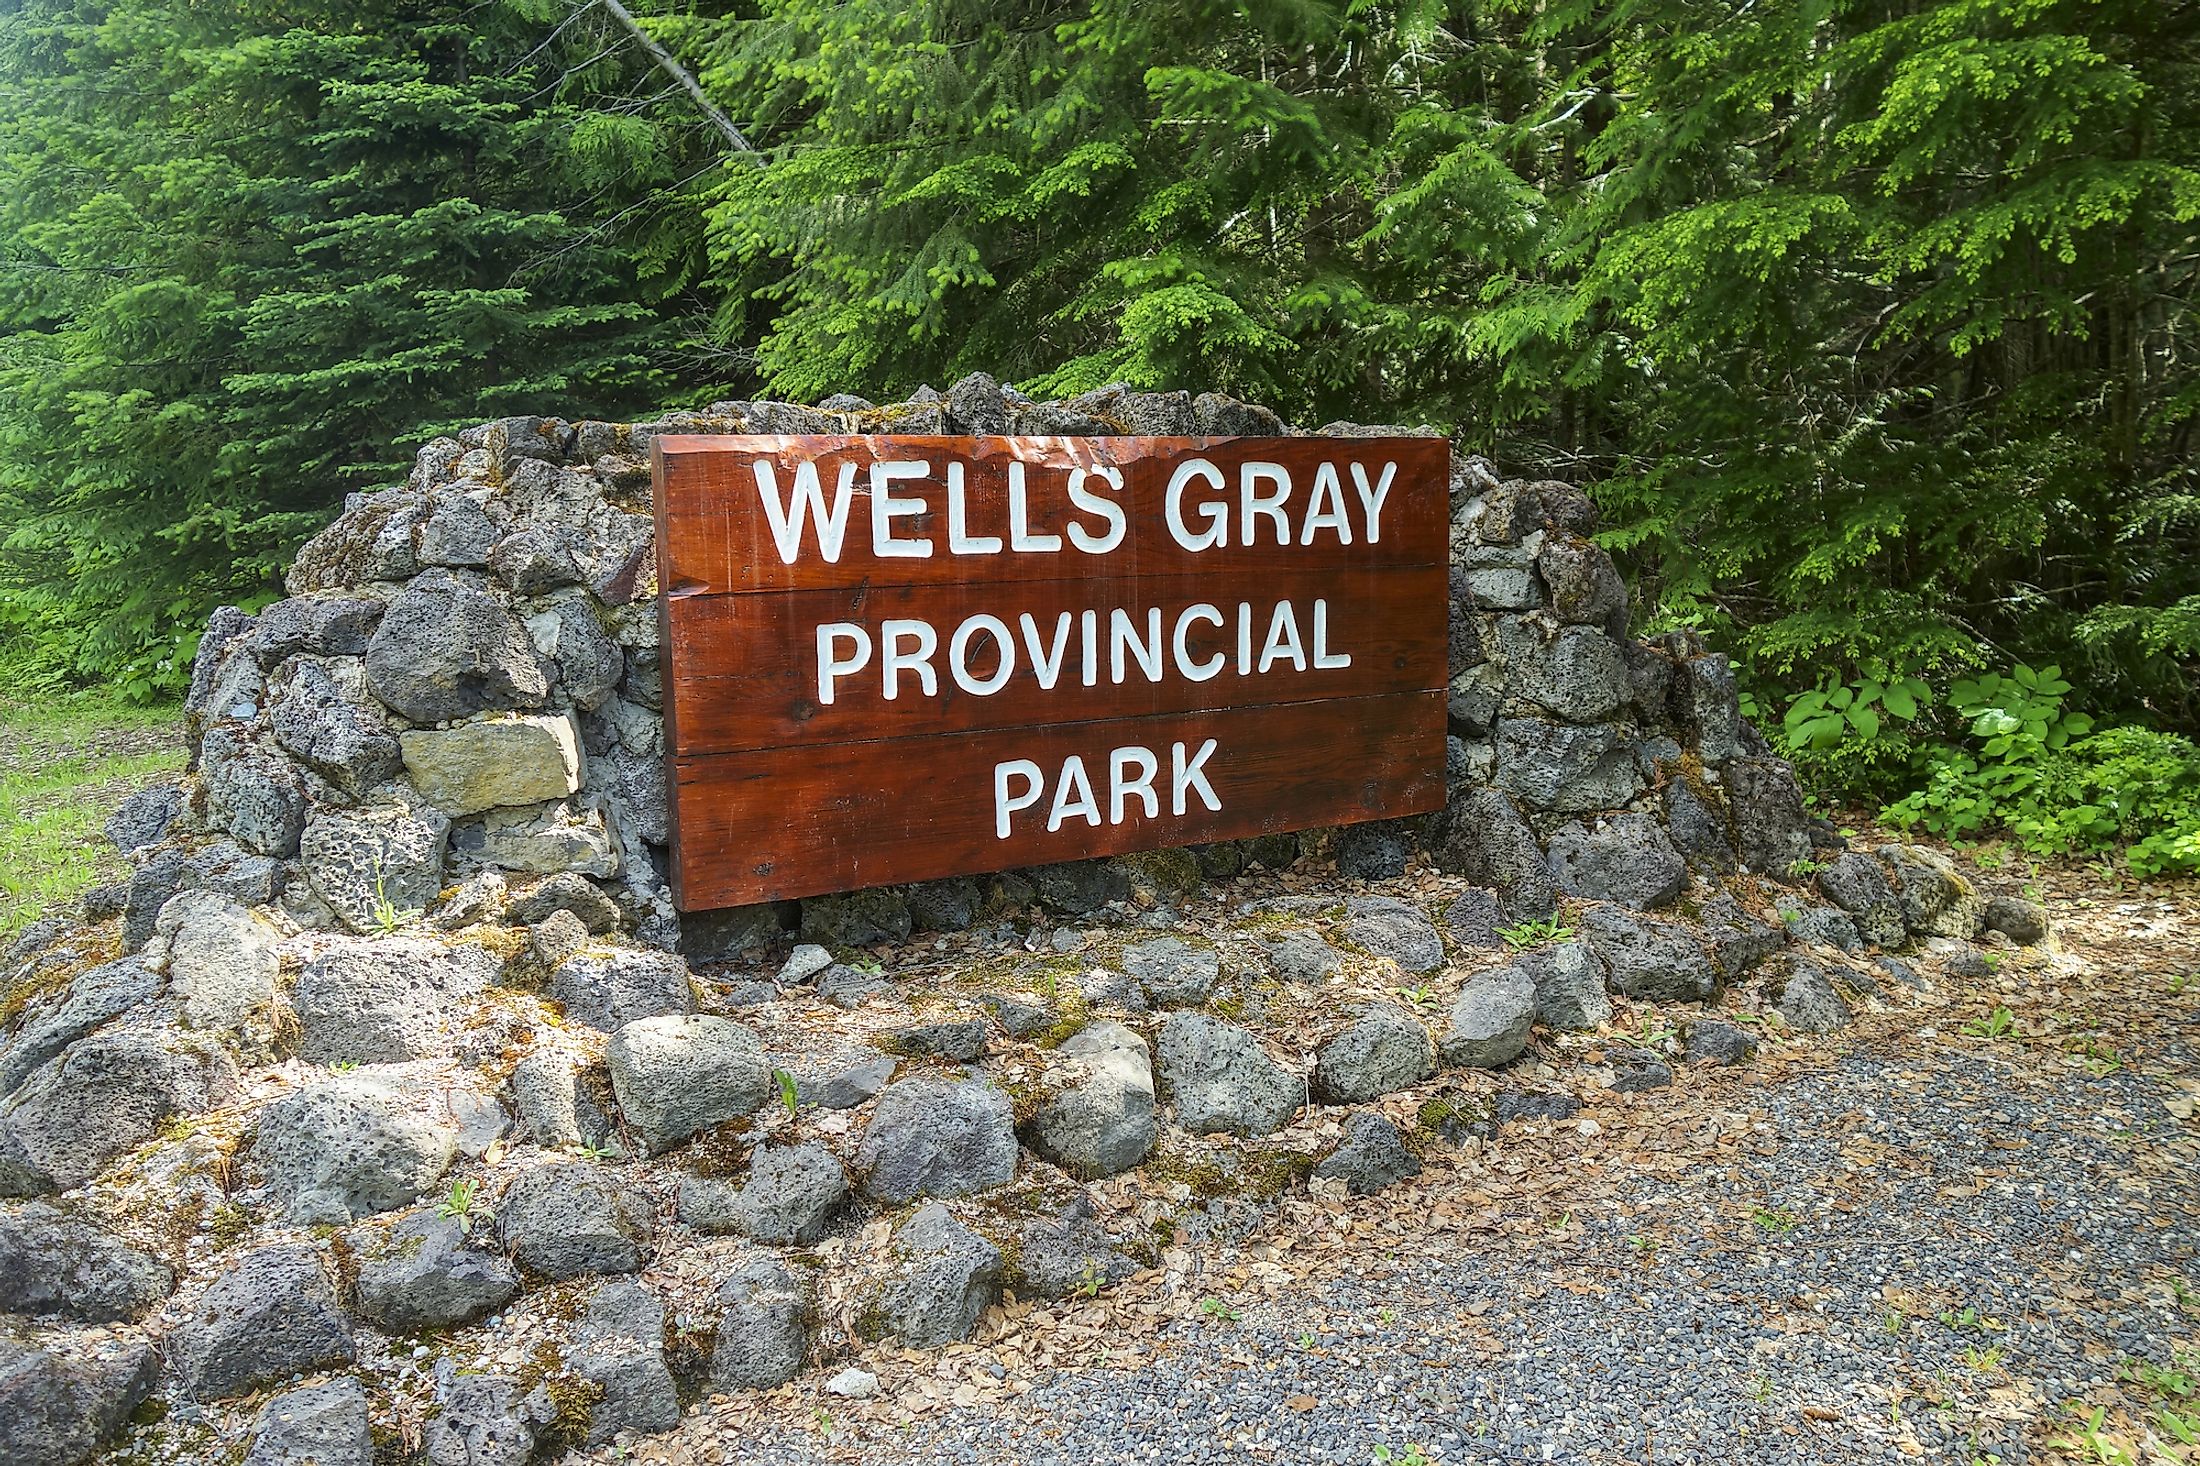 Entrance Table to Wells Gray Provincial Park on Clearwater Valley Road, British Columbia, Canada.